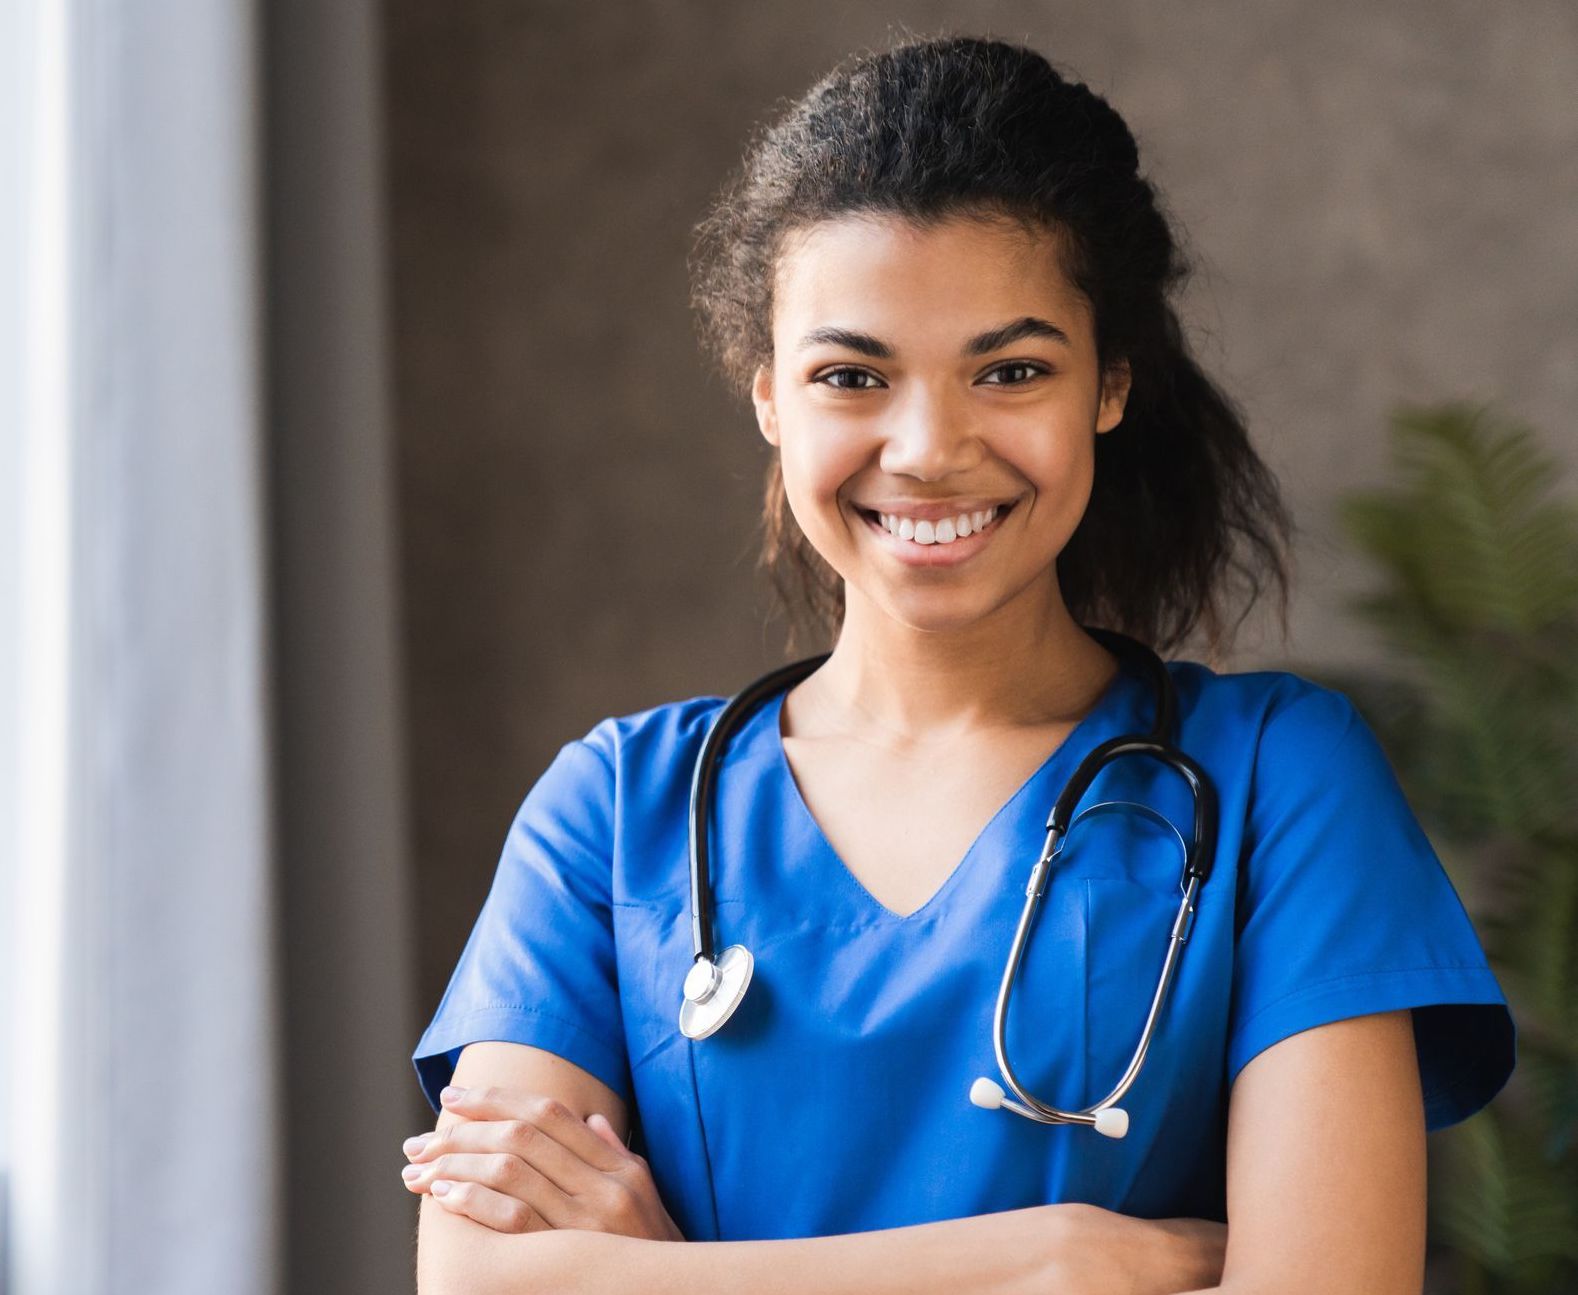 Why choose clinical assistant training in San Antonio?